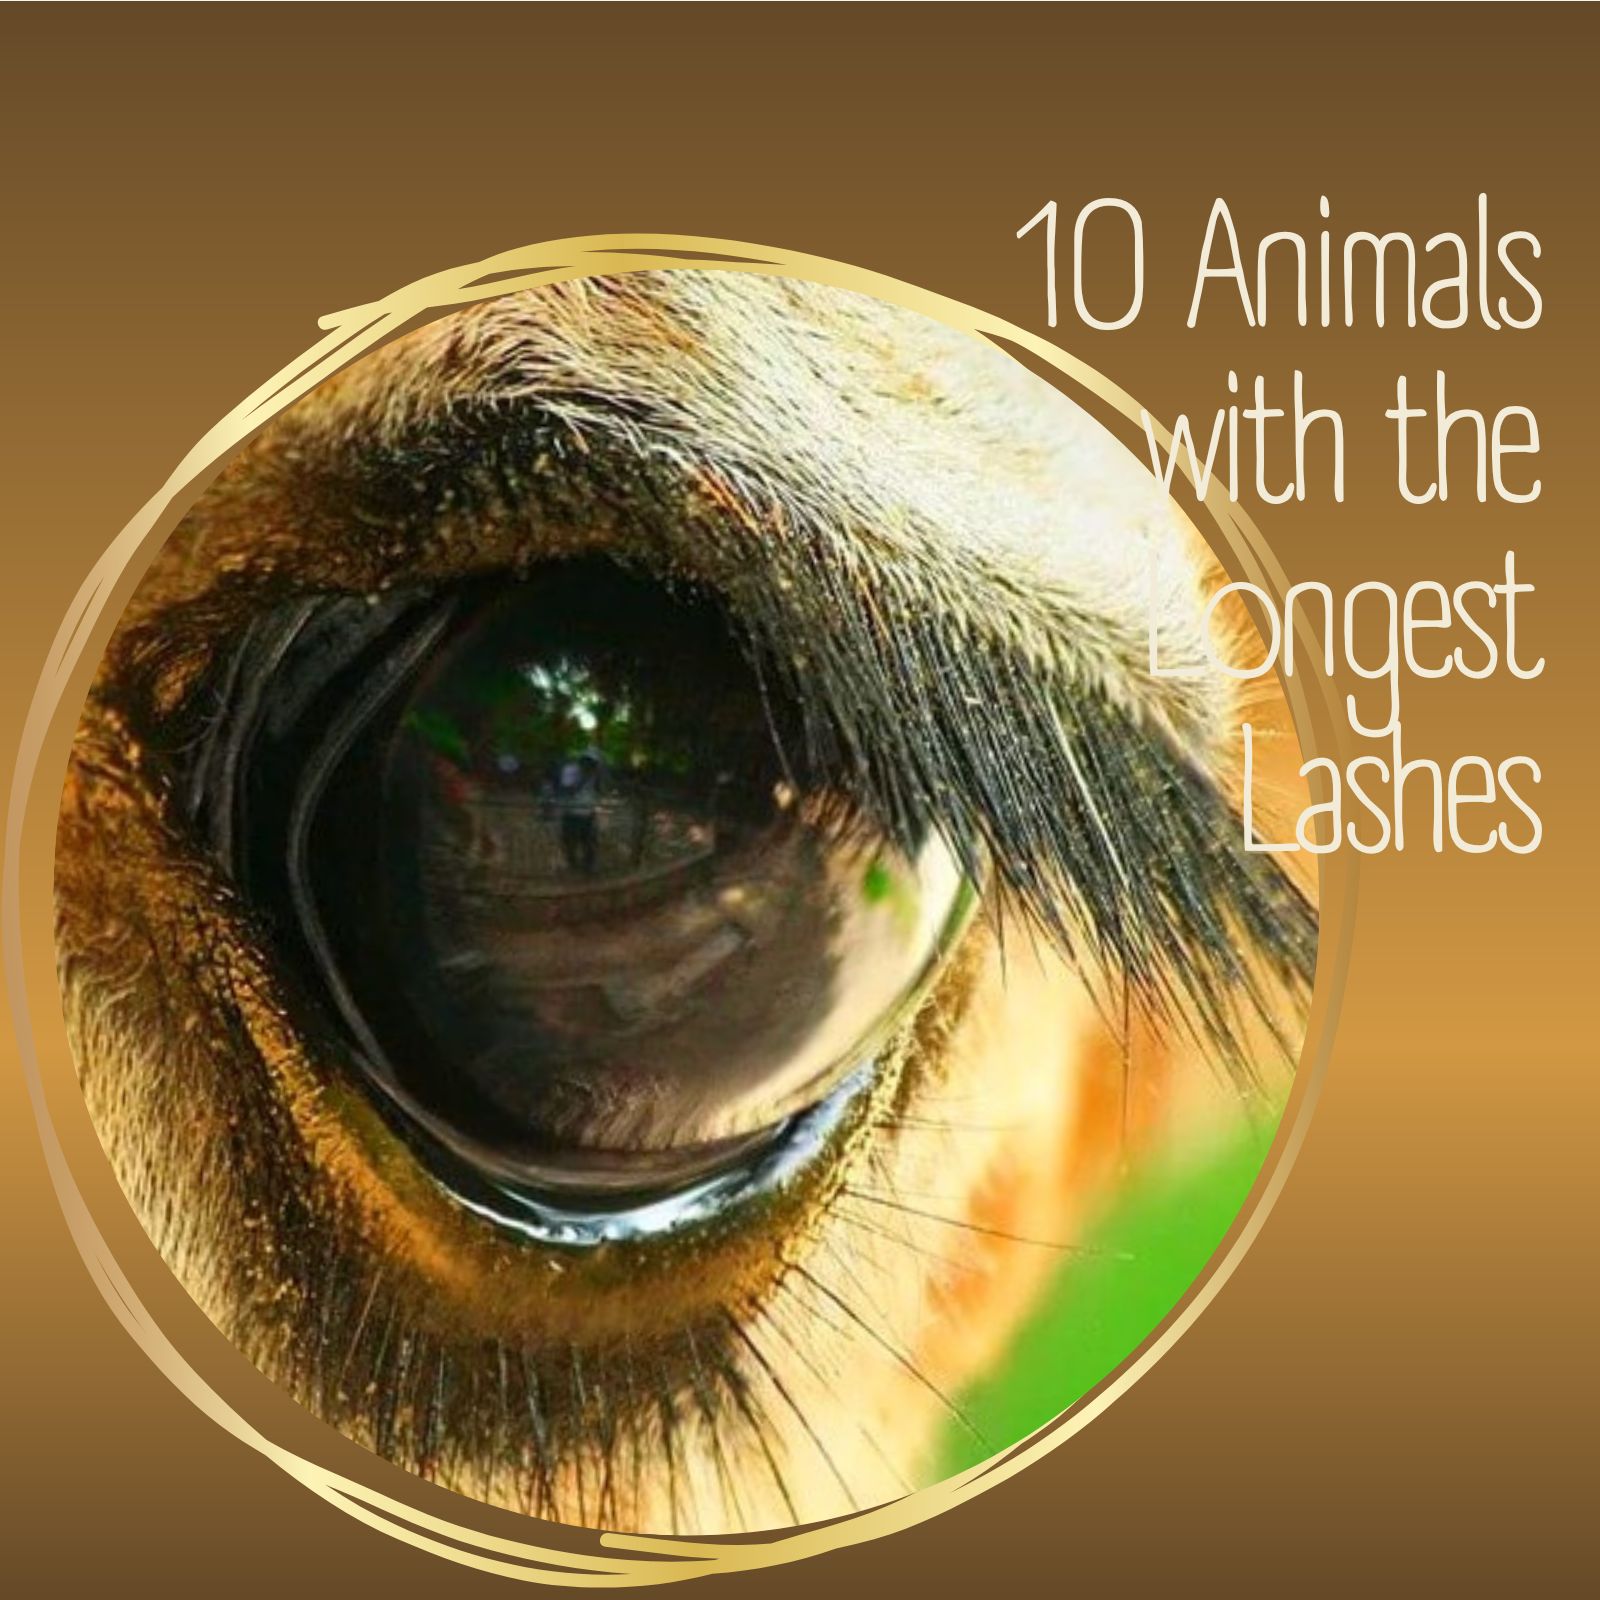 10 Animals with the Longest Lashes